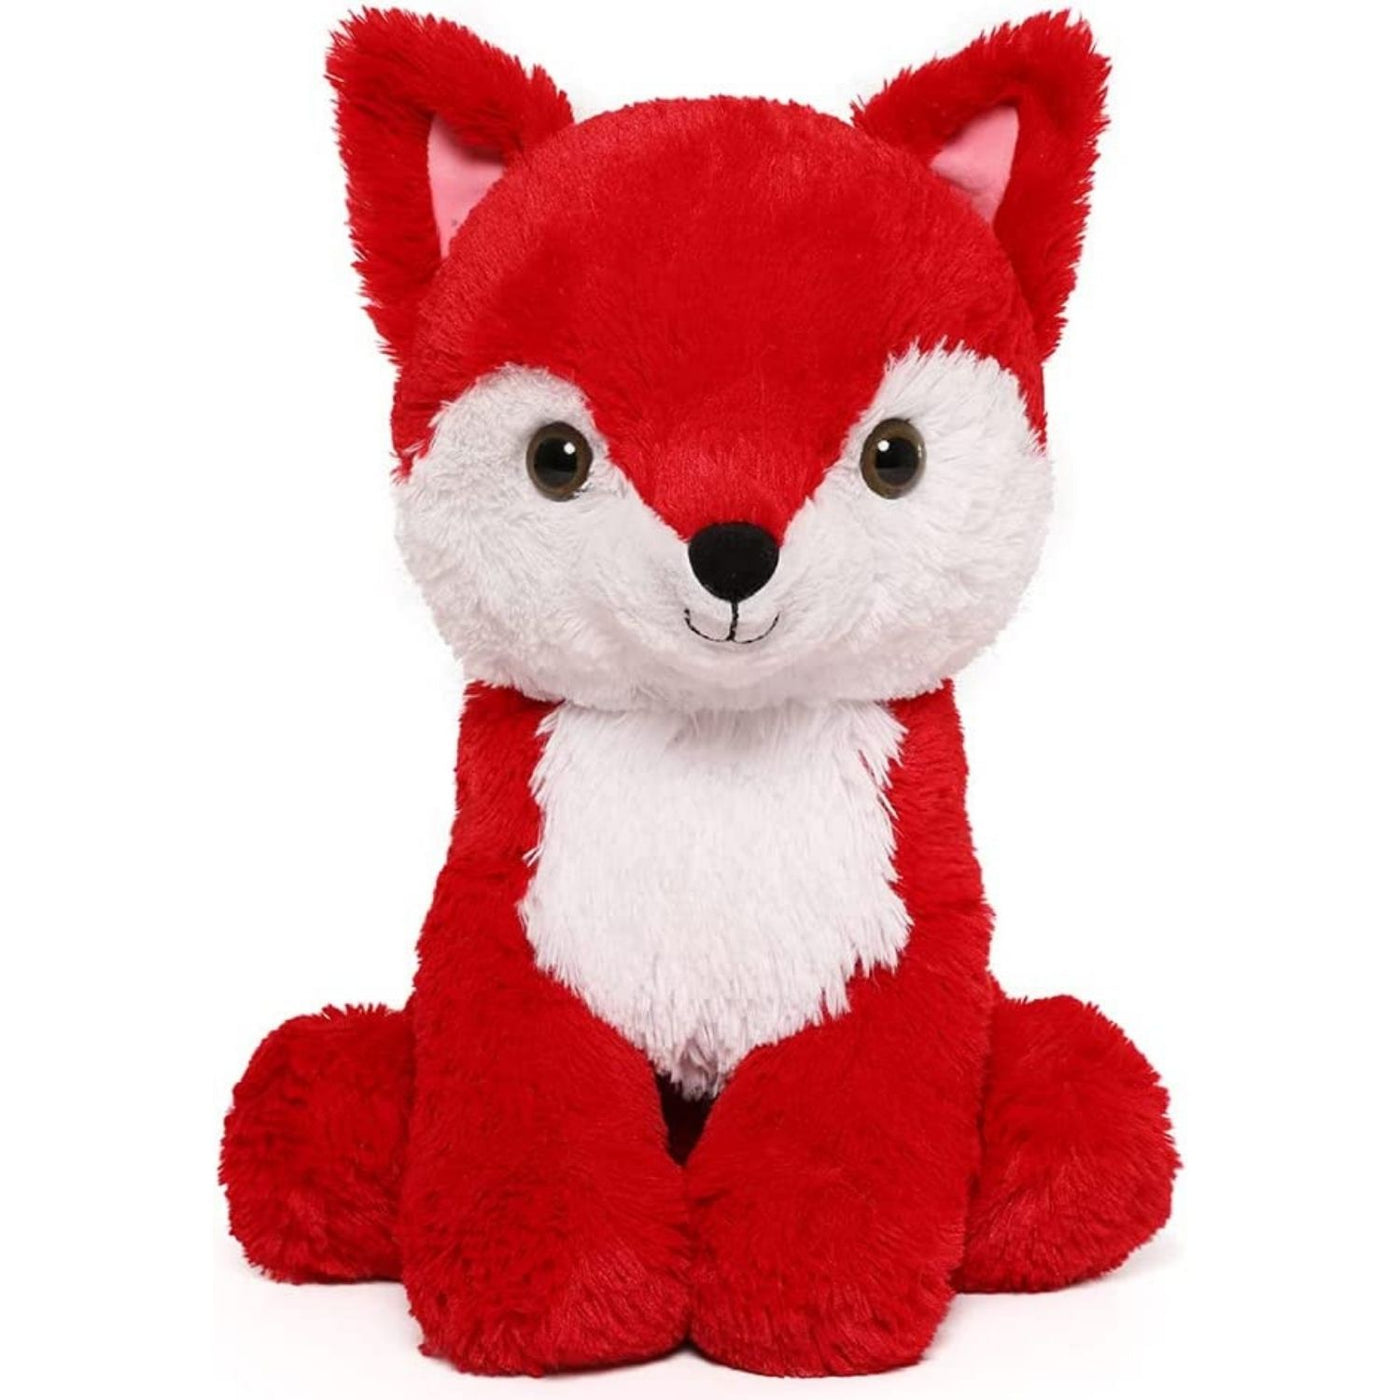 Fox Plush Toy Stuffed Animal Toy, Red, 18 Inches